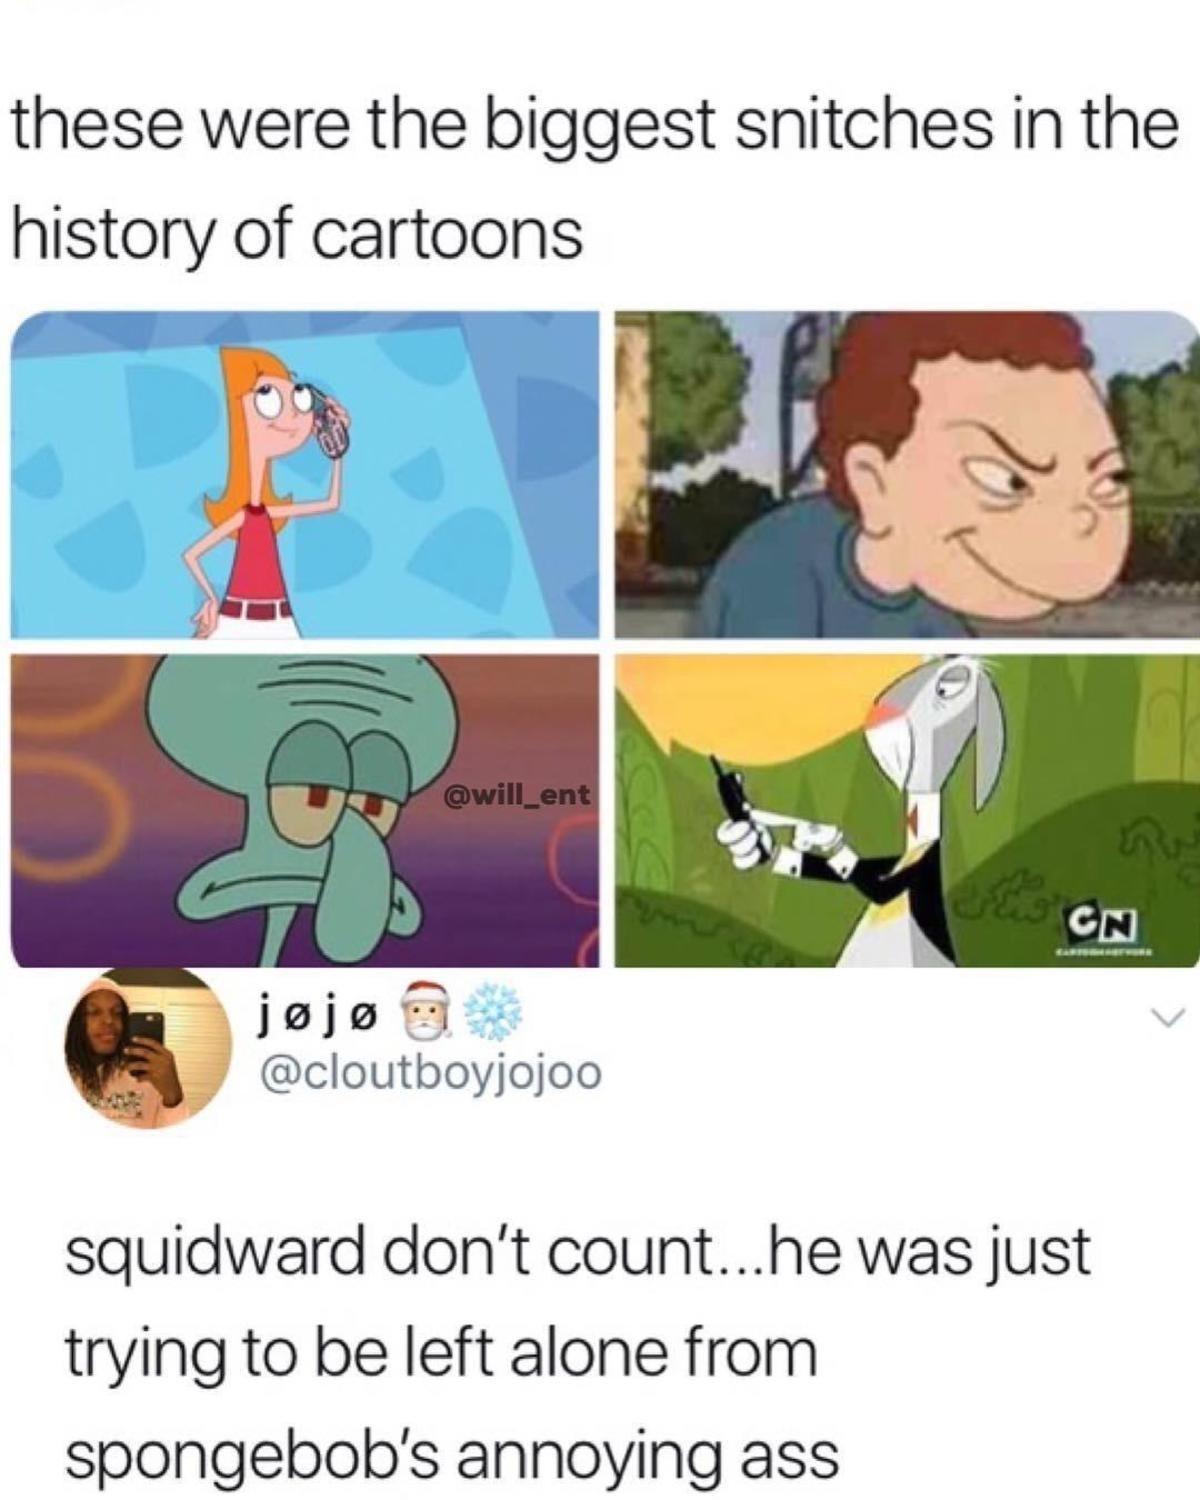 biggest snitches meme - these were the biggest snitches in the history of cartoons 5 Cn jj squidward don't count...he was just trying to be left alone from spongebob's annoying ass